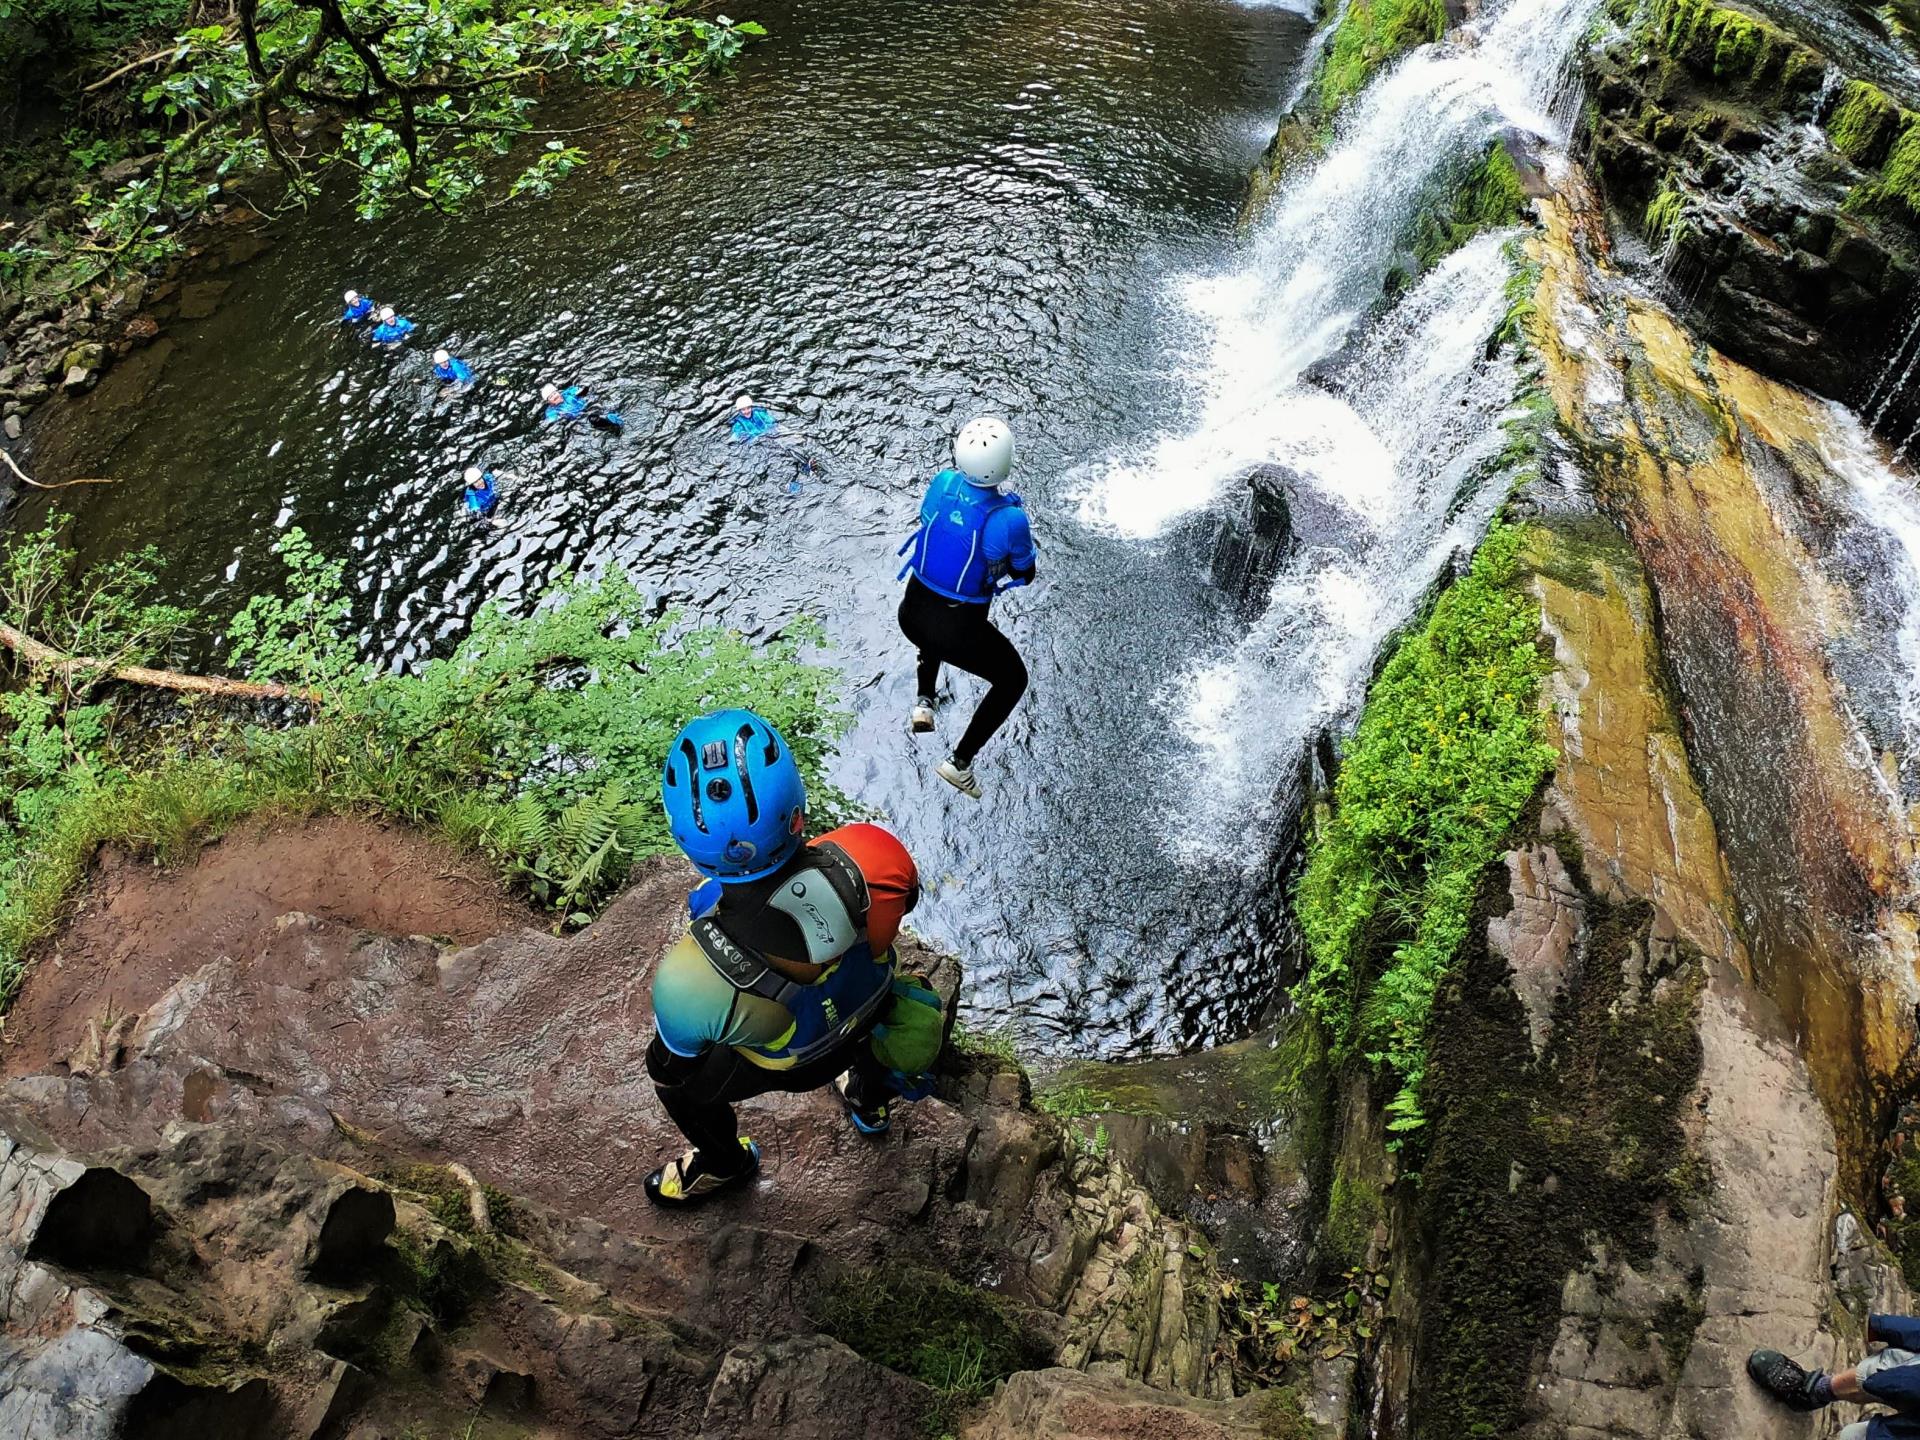 Canyoning / Gorge Walking in Brecon Beacons